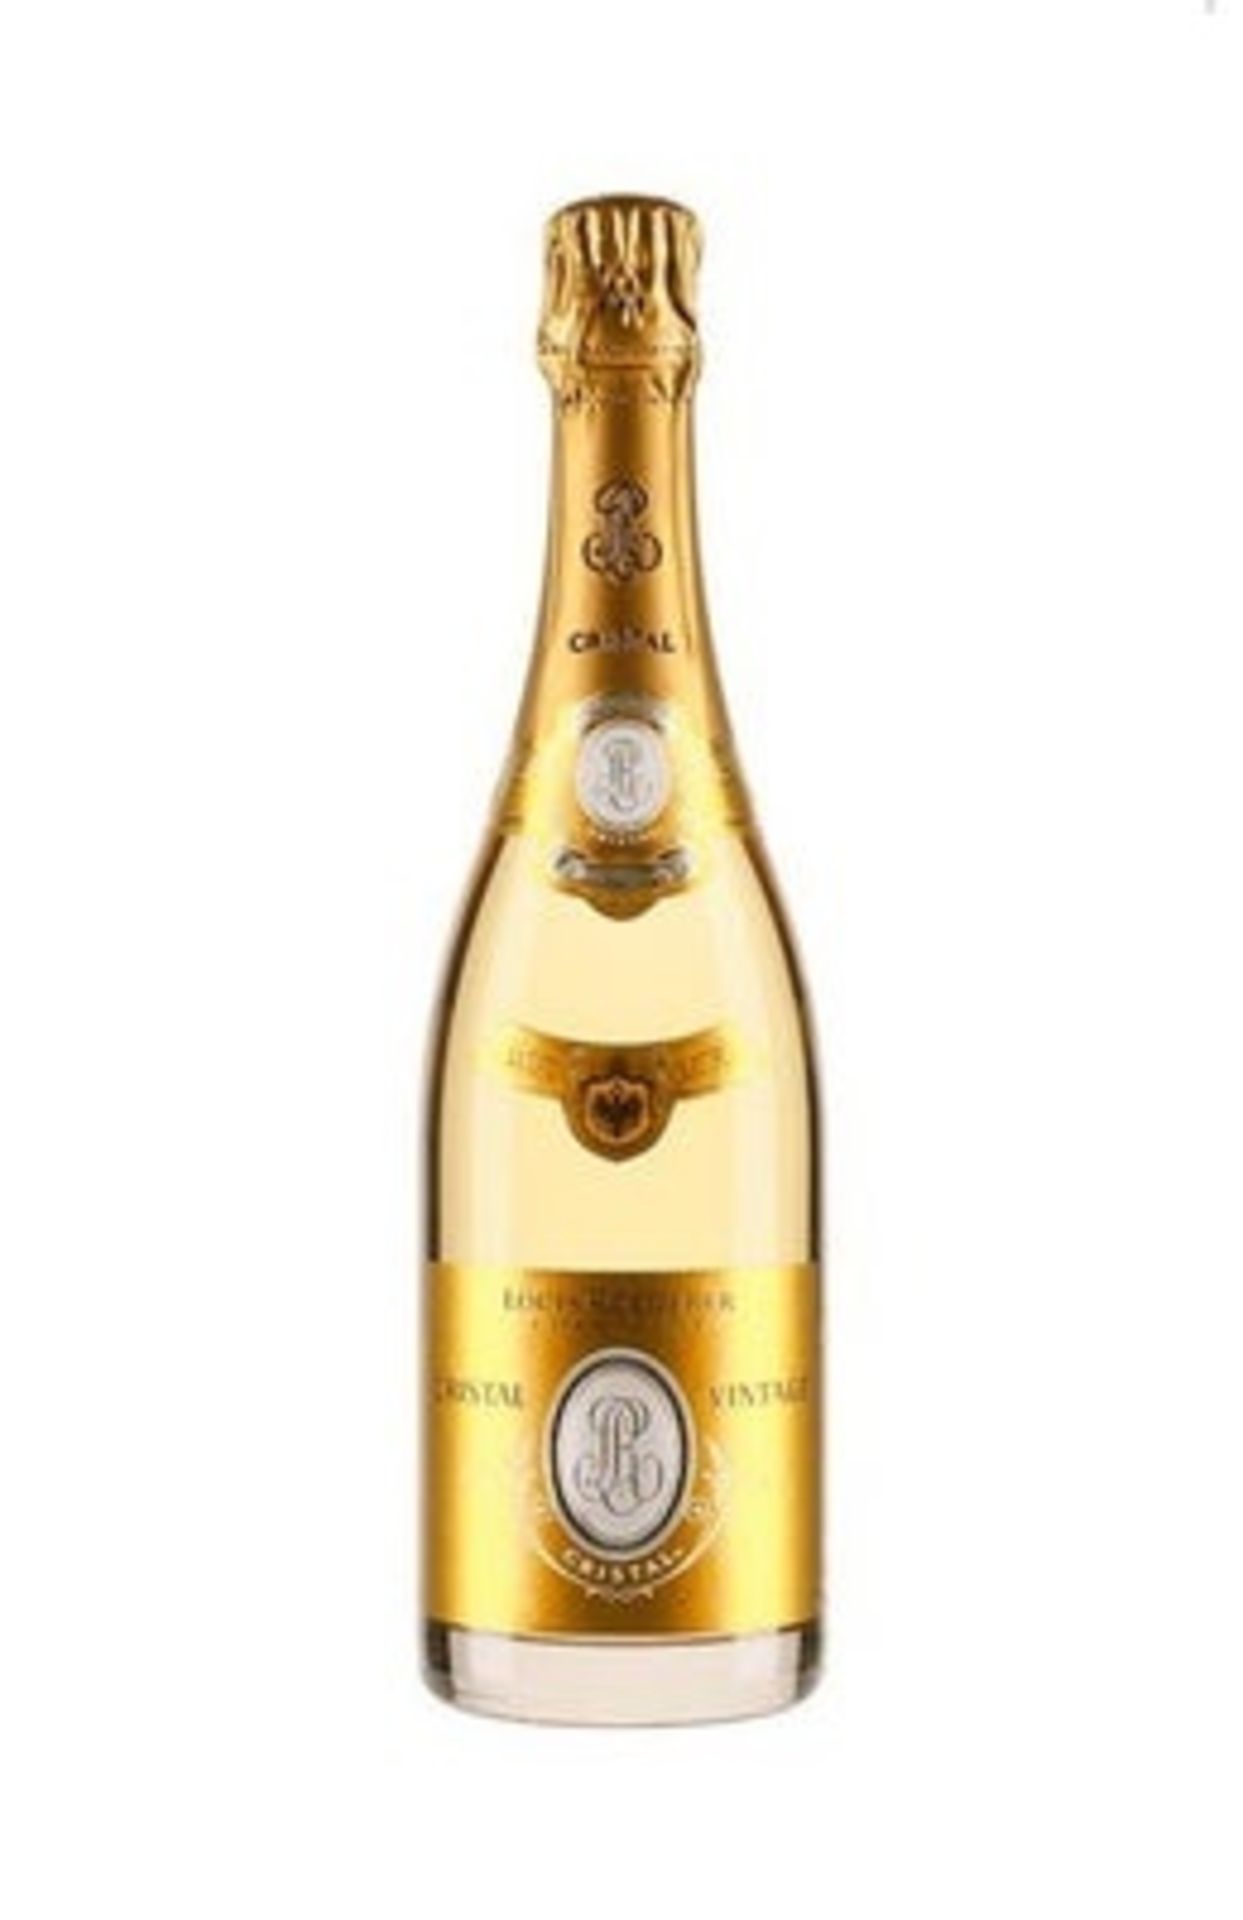 Louis Roederer Champagne Cristal Brut, 75 Cl 2008 ( Bid Is For 1x Bottle Option To Purchase More)